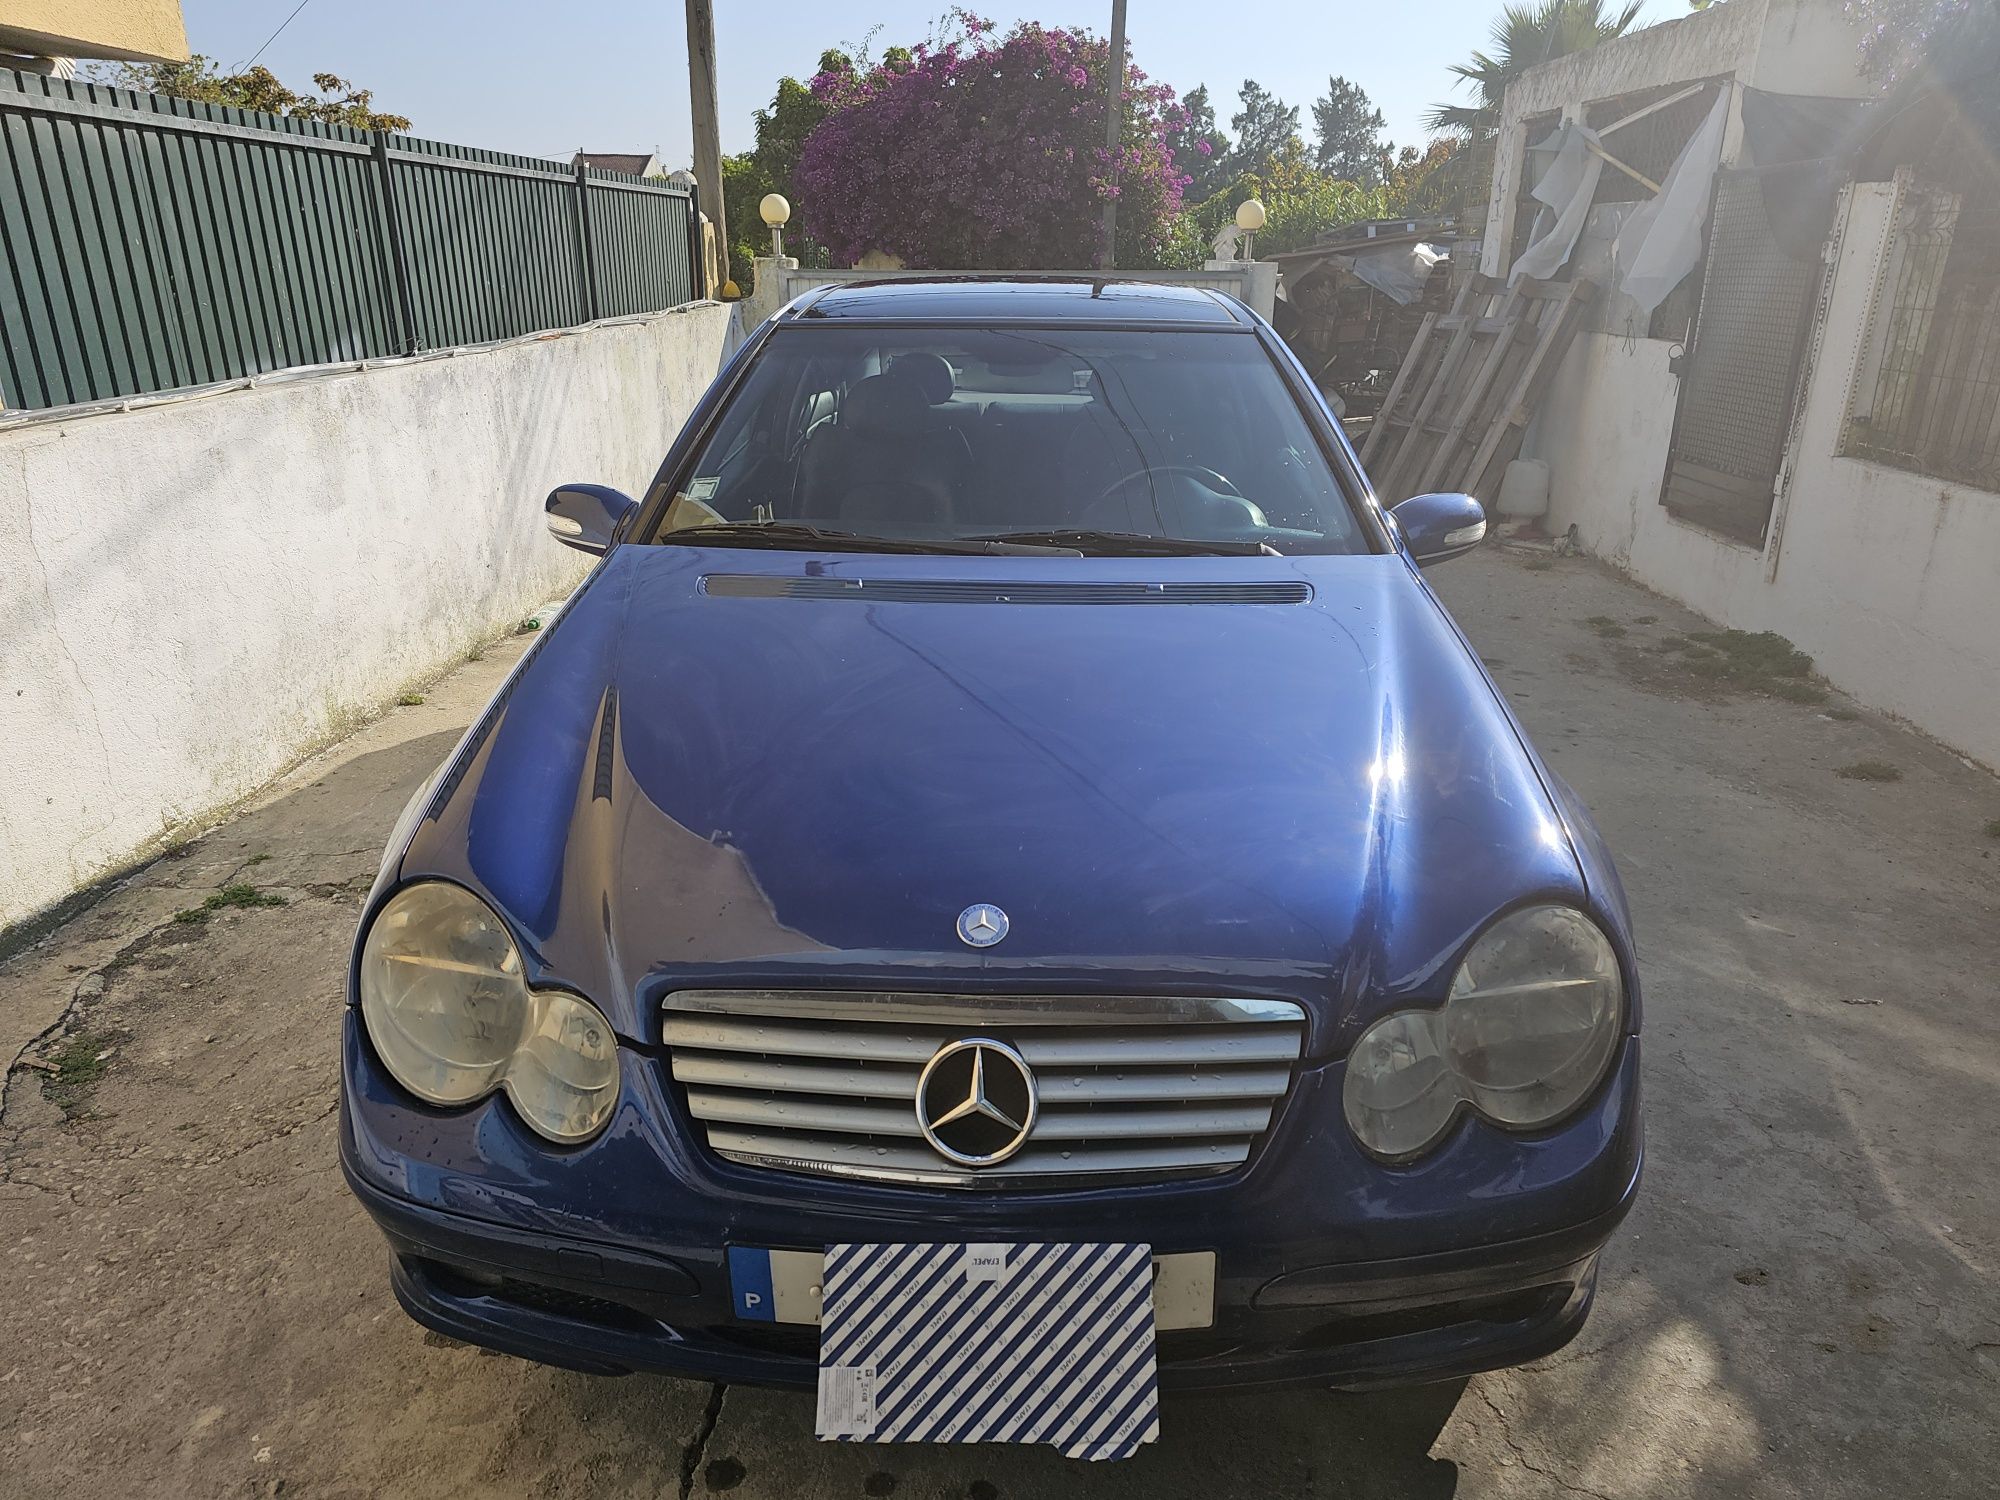 Mercedes 220 sport coupe